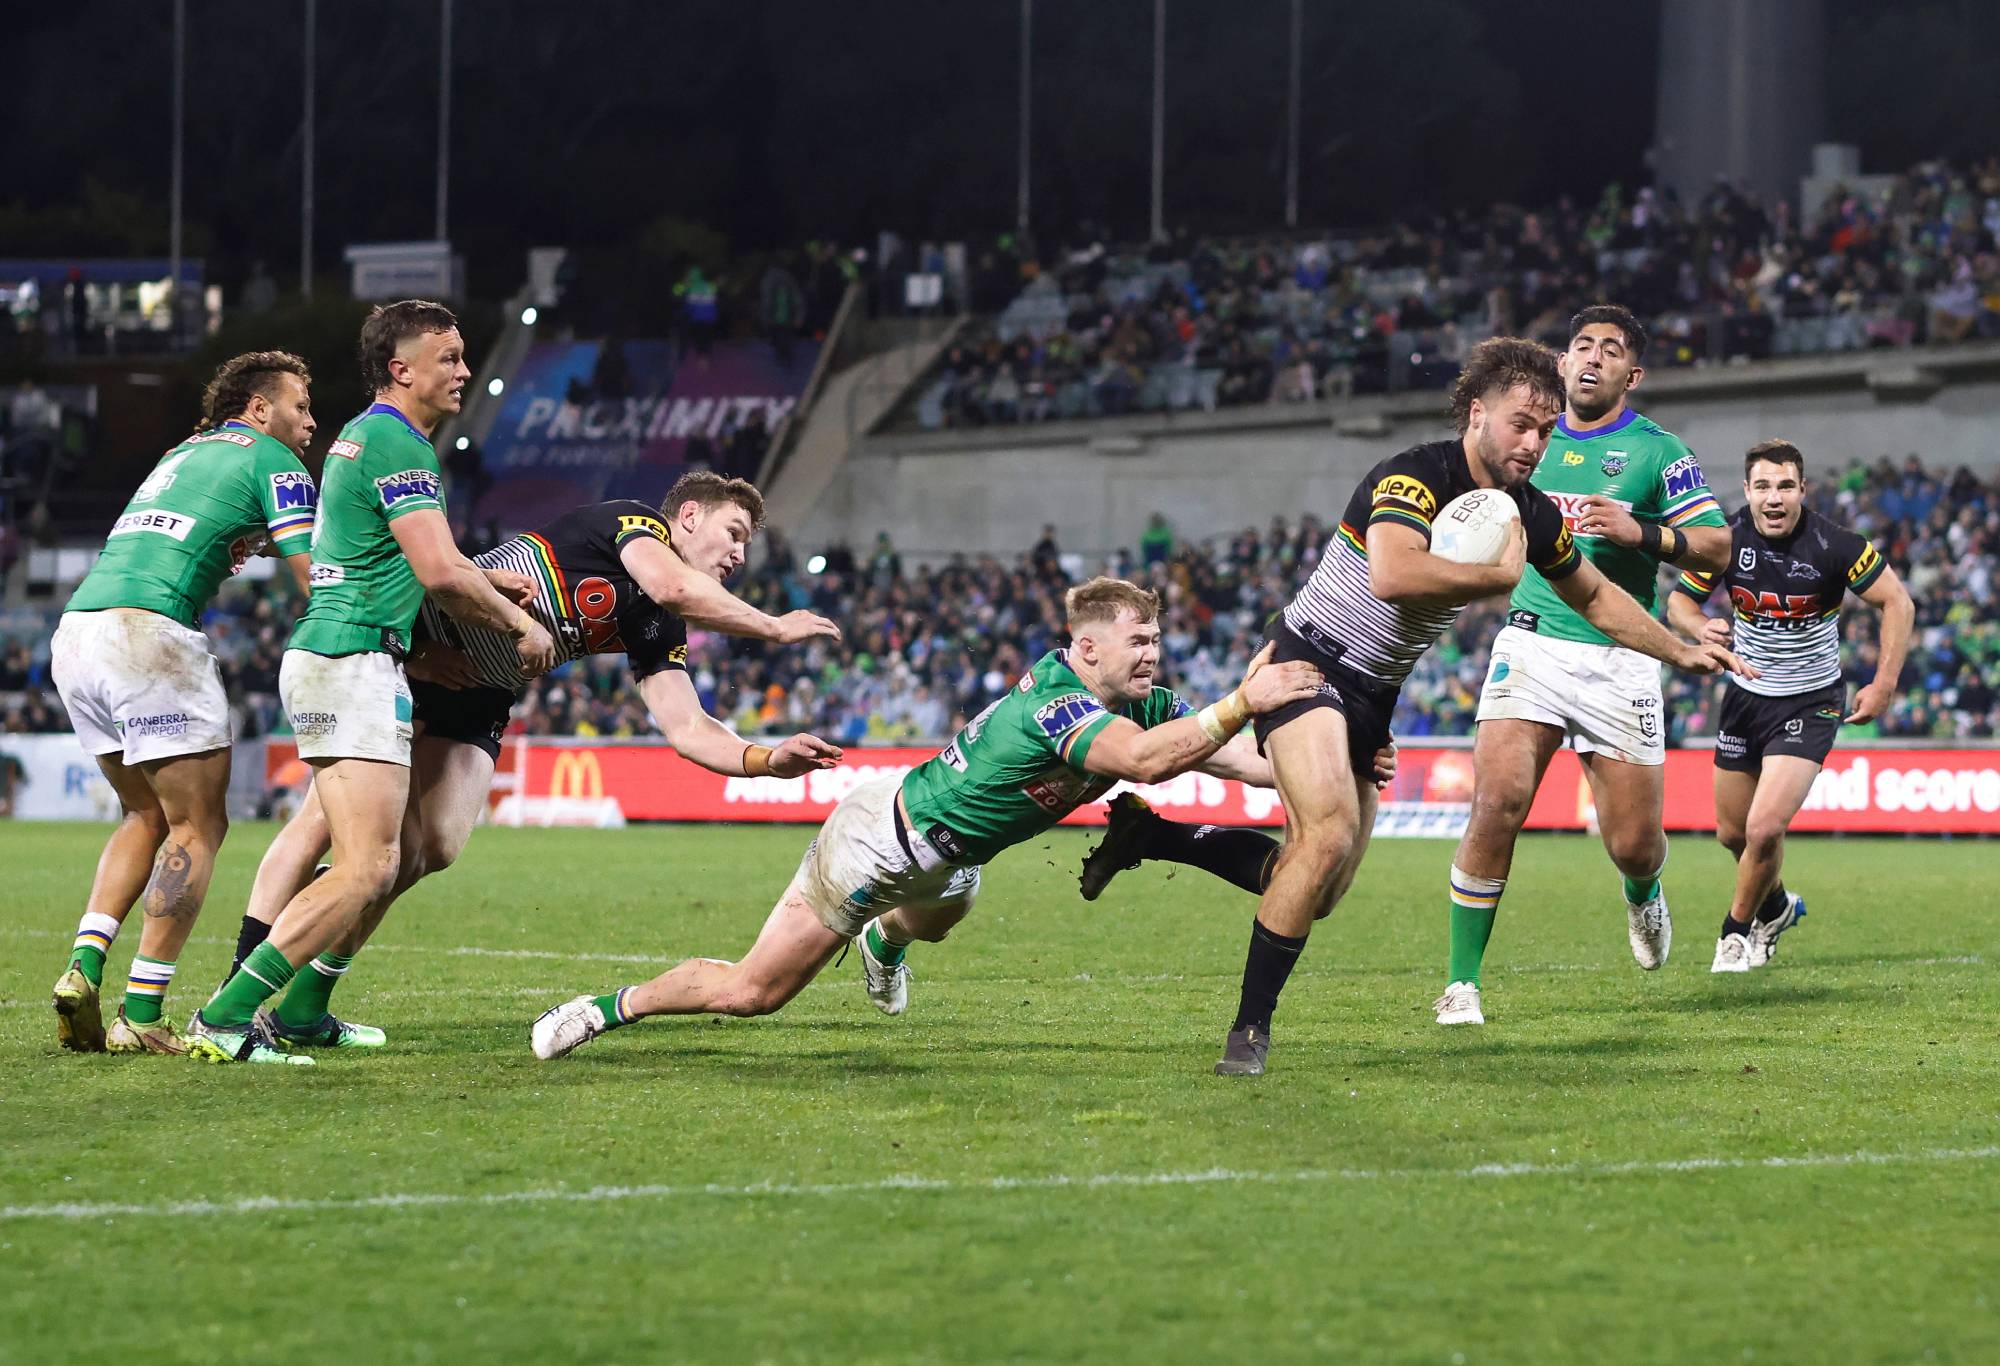 CANBERRA, AUSTRALIA – AUGUST 06: Jaeman Salmon of the Panthers scores a try during the NRL Round 21 match between Canberra Raiders and Penrith Panthers at GIO Stadium on August 06, 2022, in Canberra, Australia.  (Photo by Mark Evans/Getty Images)